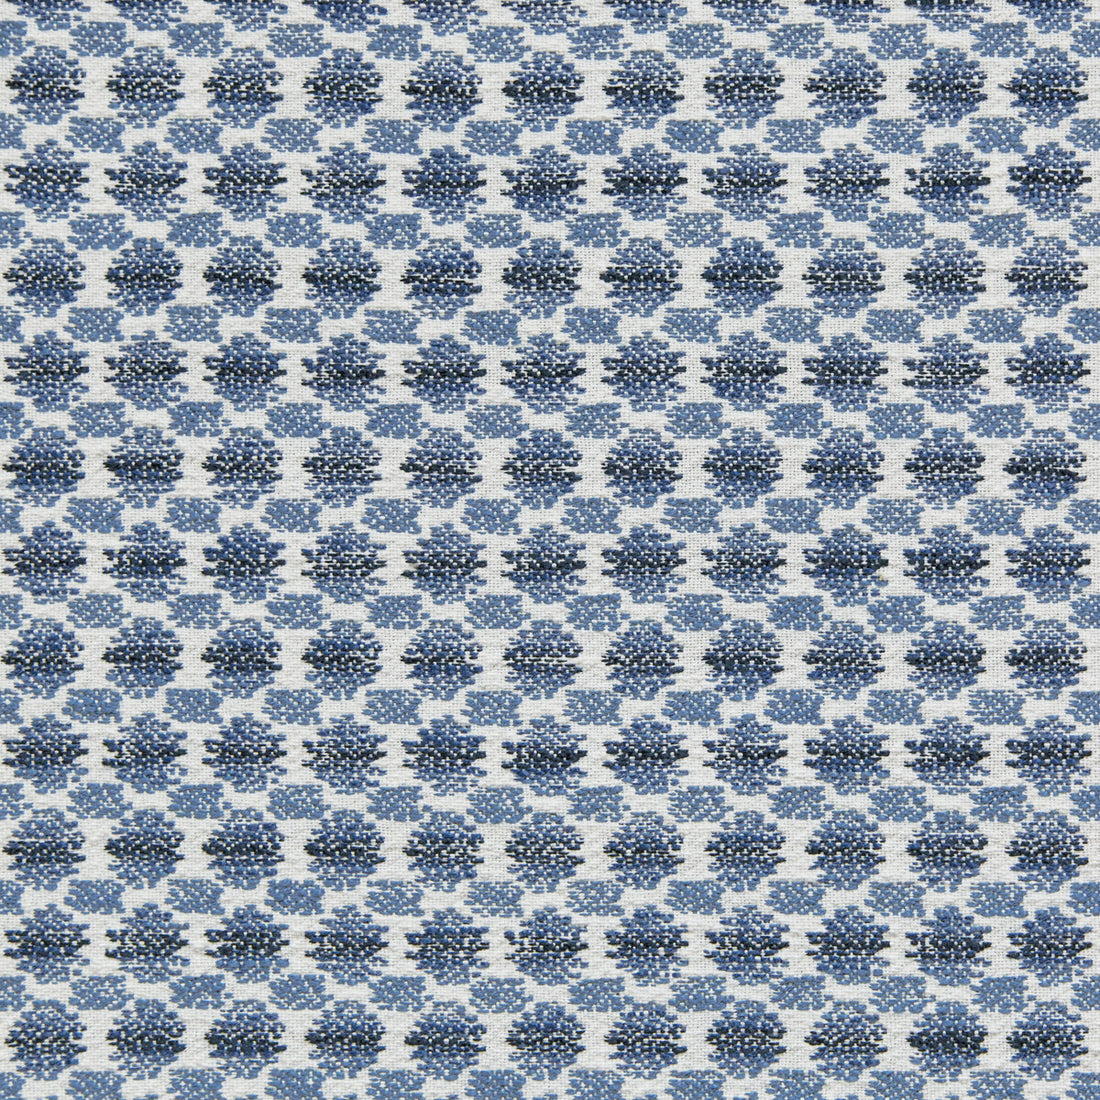 Lancing Weave fabric in blue color - pattern 2020100.5.0 - by Lee Jofa in the Linford Weaves collection